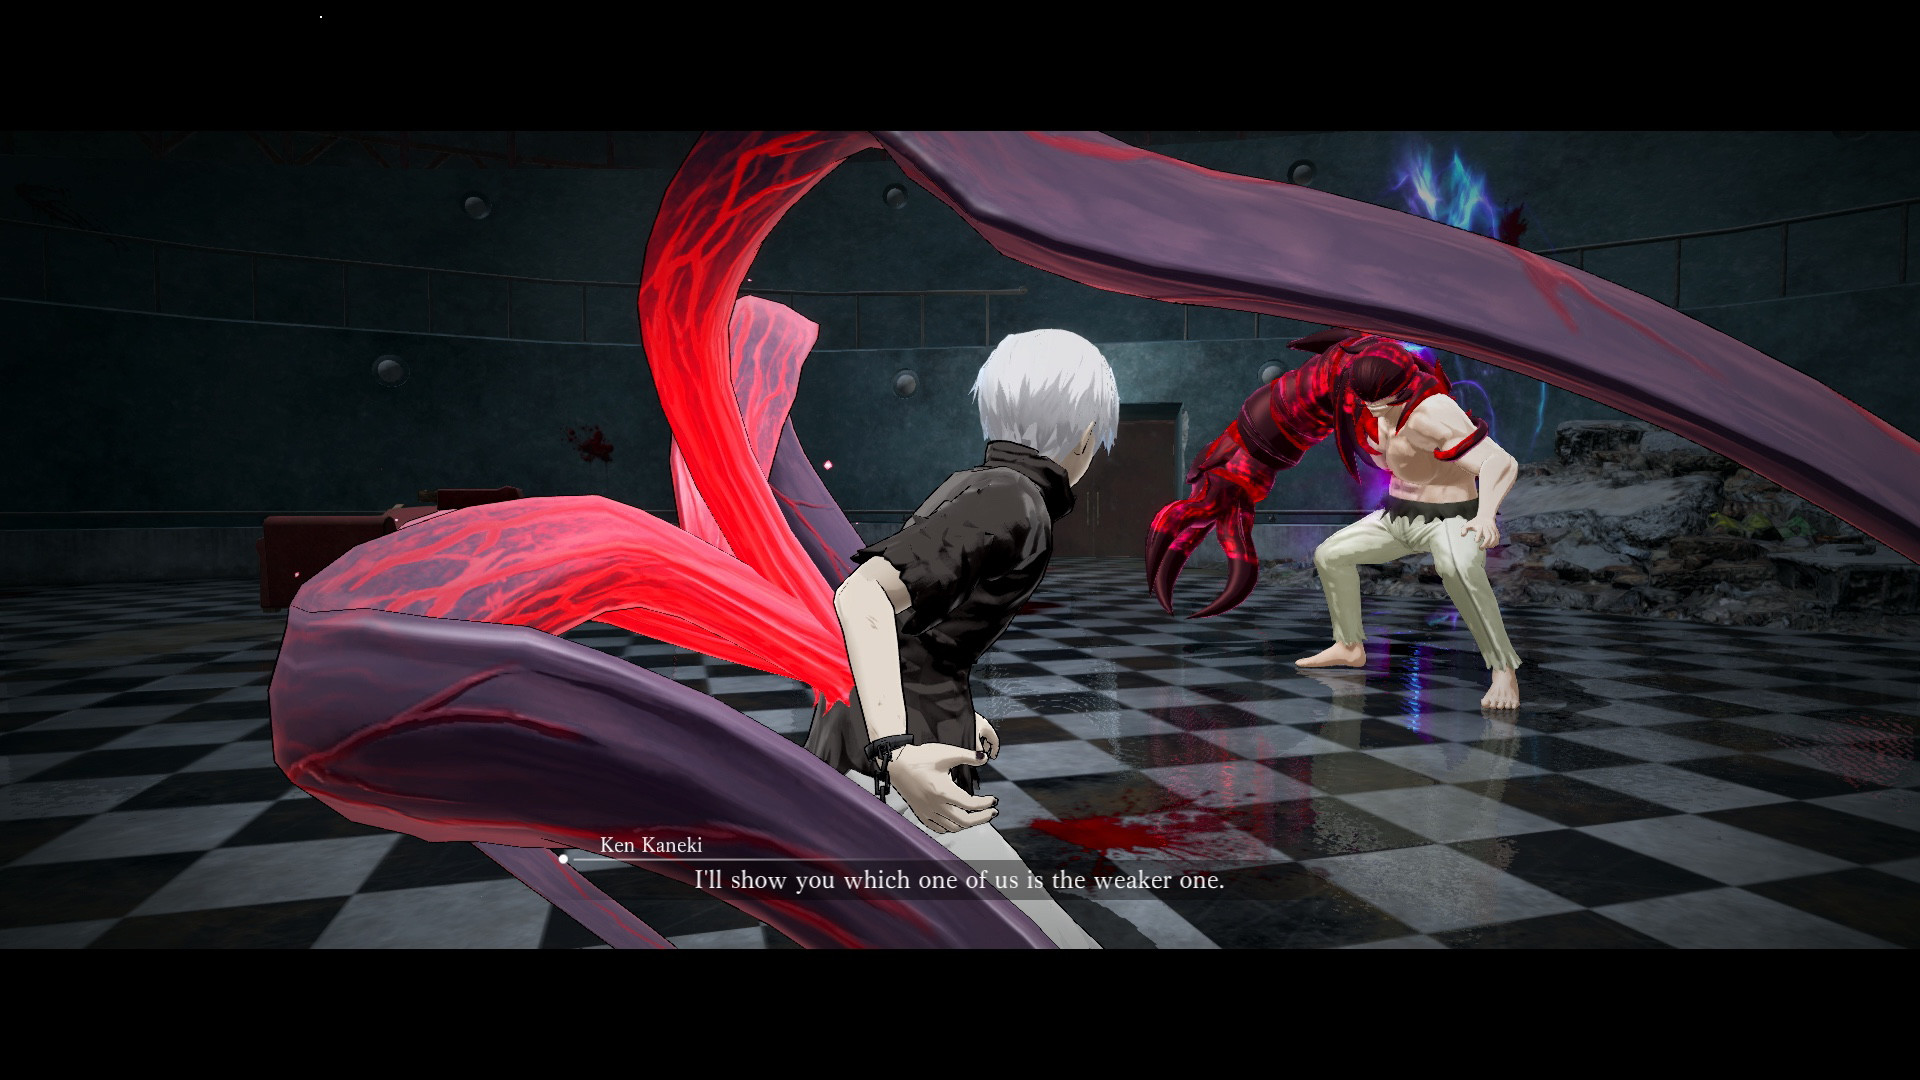 TOKYO GHOUL:re [CALL to EXIST] Free Download